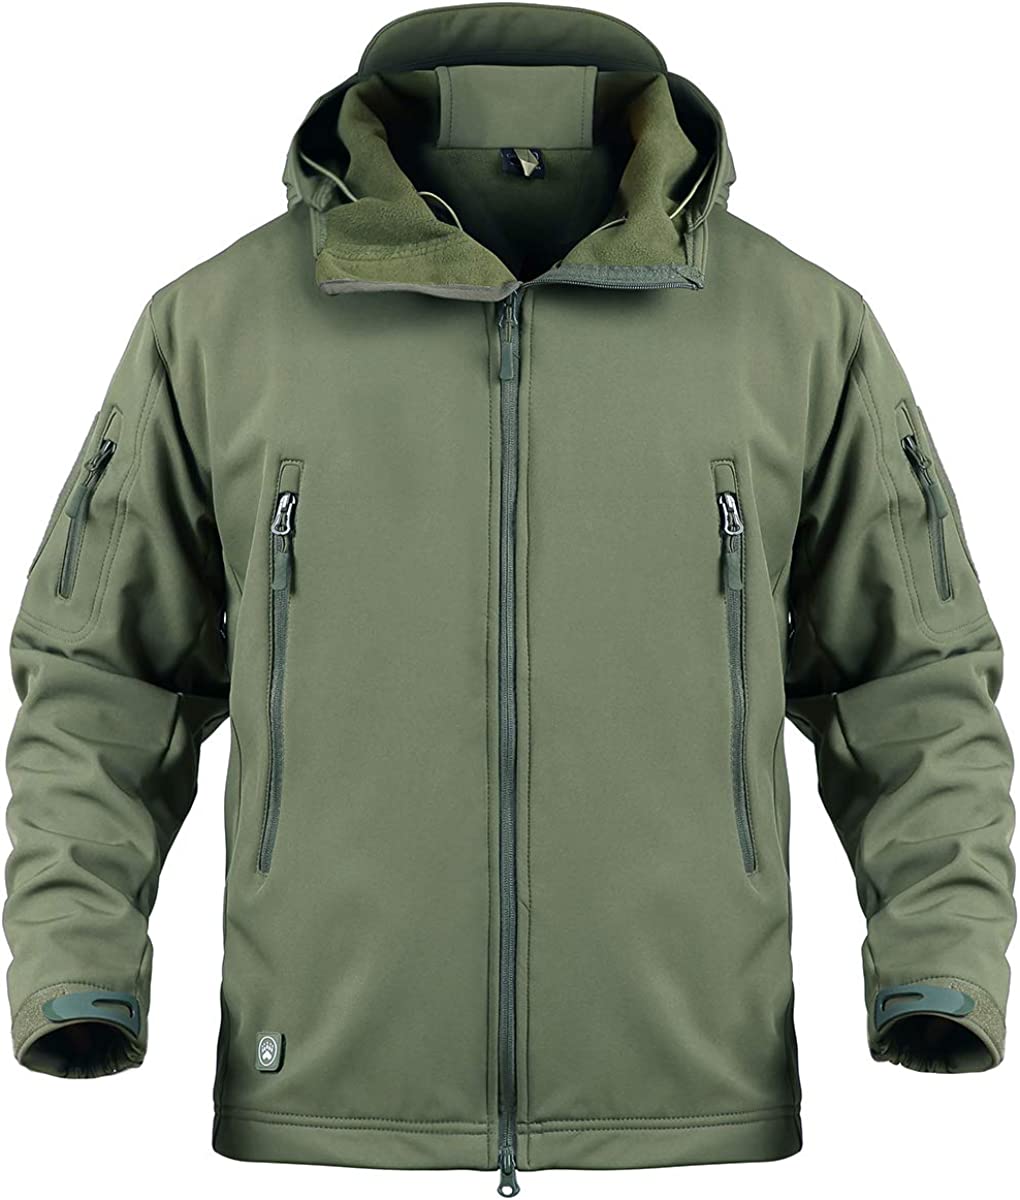 ReFire Gear Men's Army Special Ops Military Tactical Jacket Softshell Fleece Hooded Outdoor Coat Army Green / X-Large